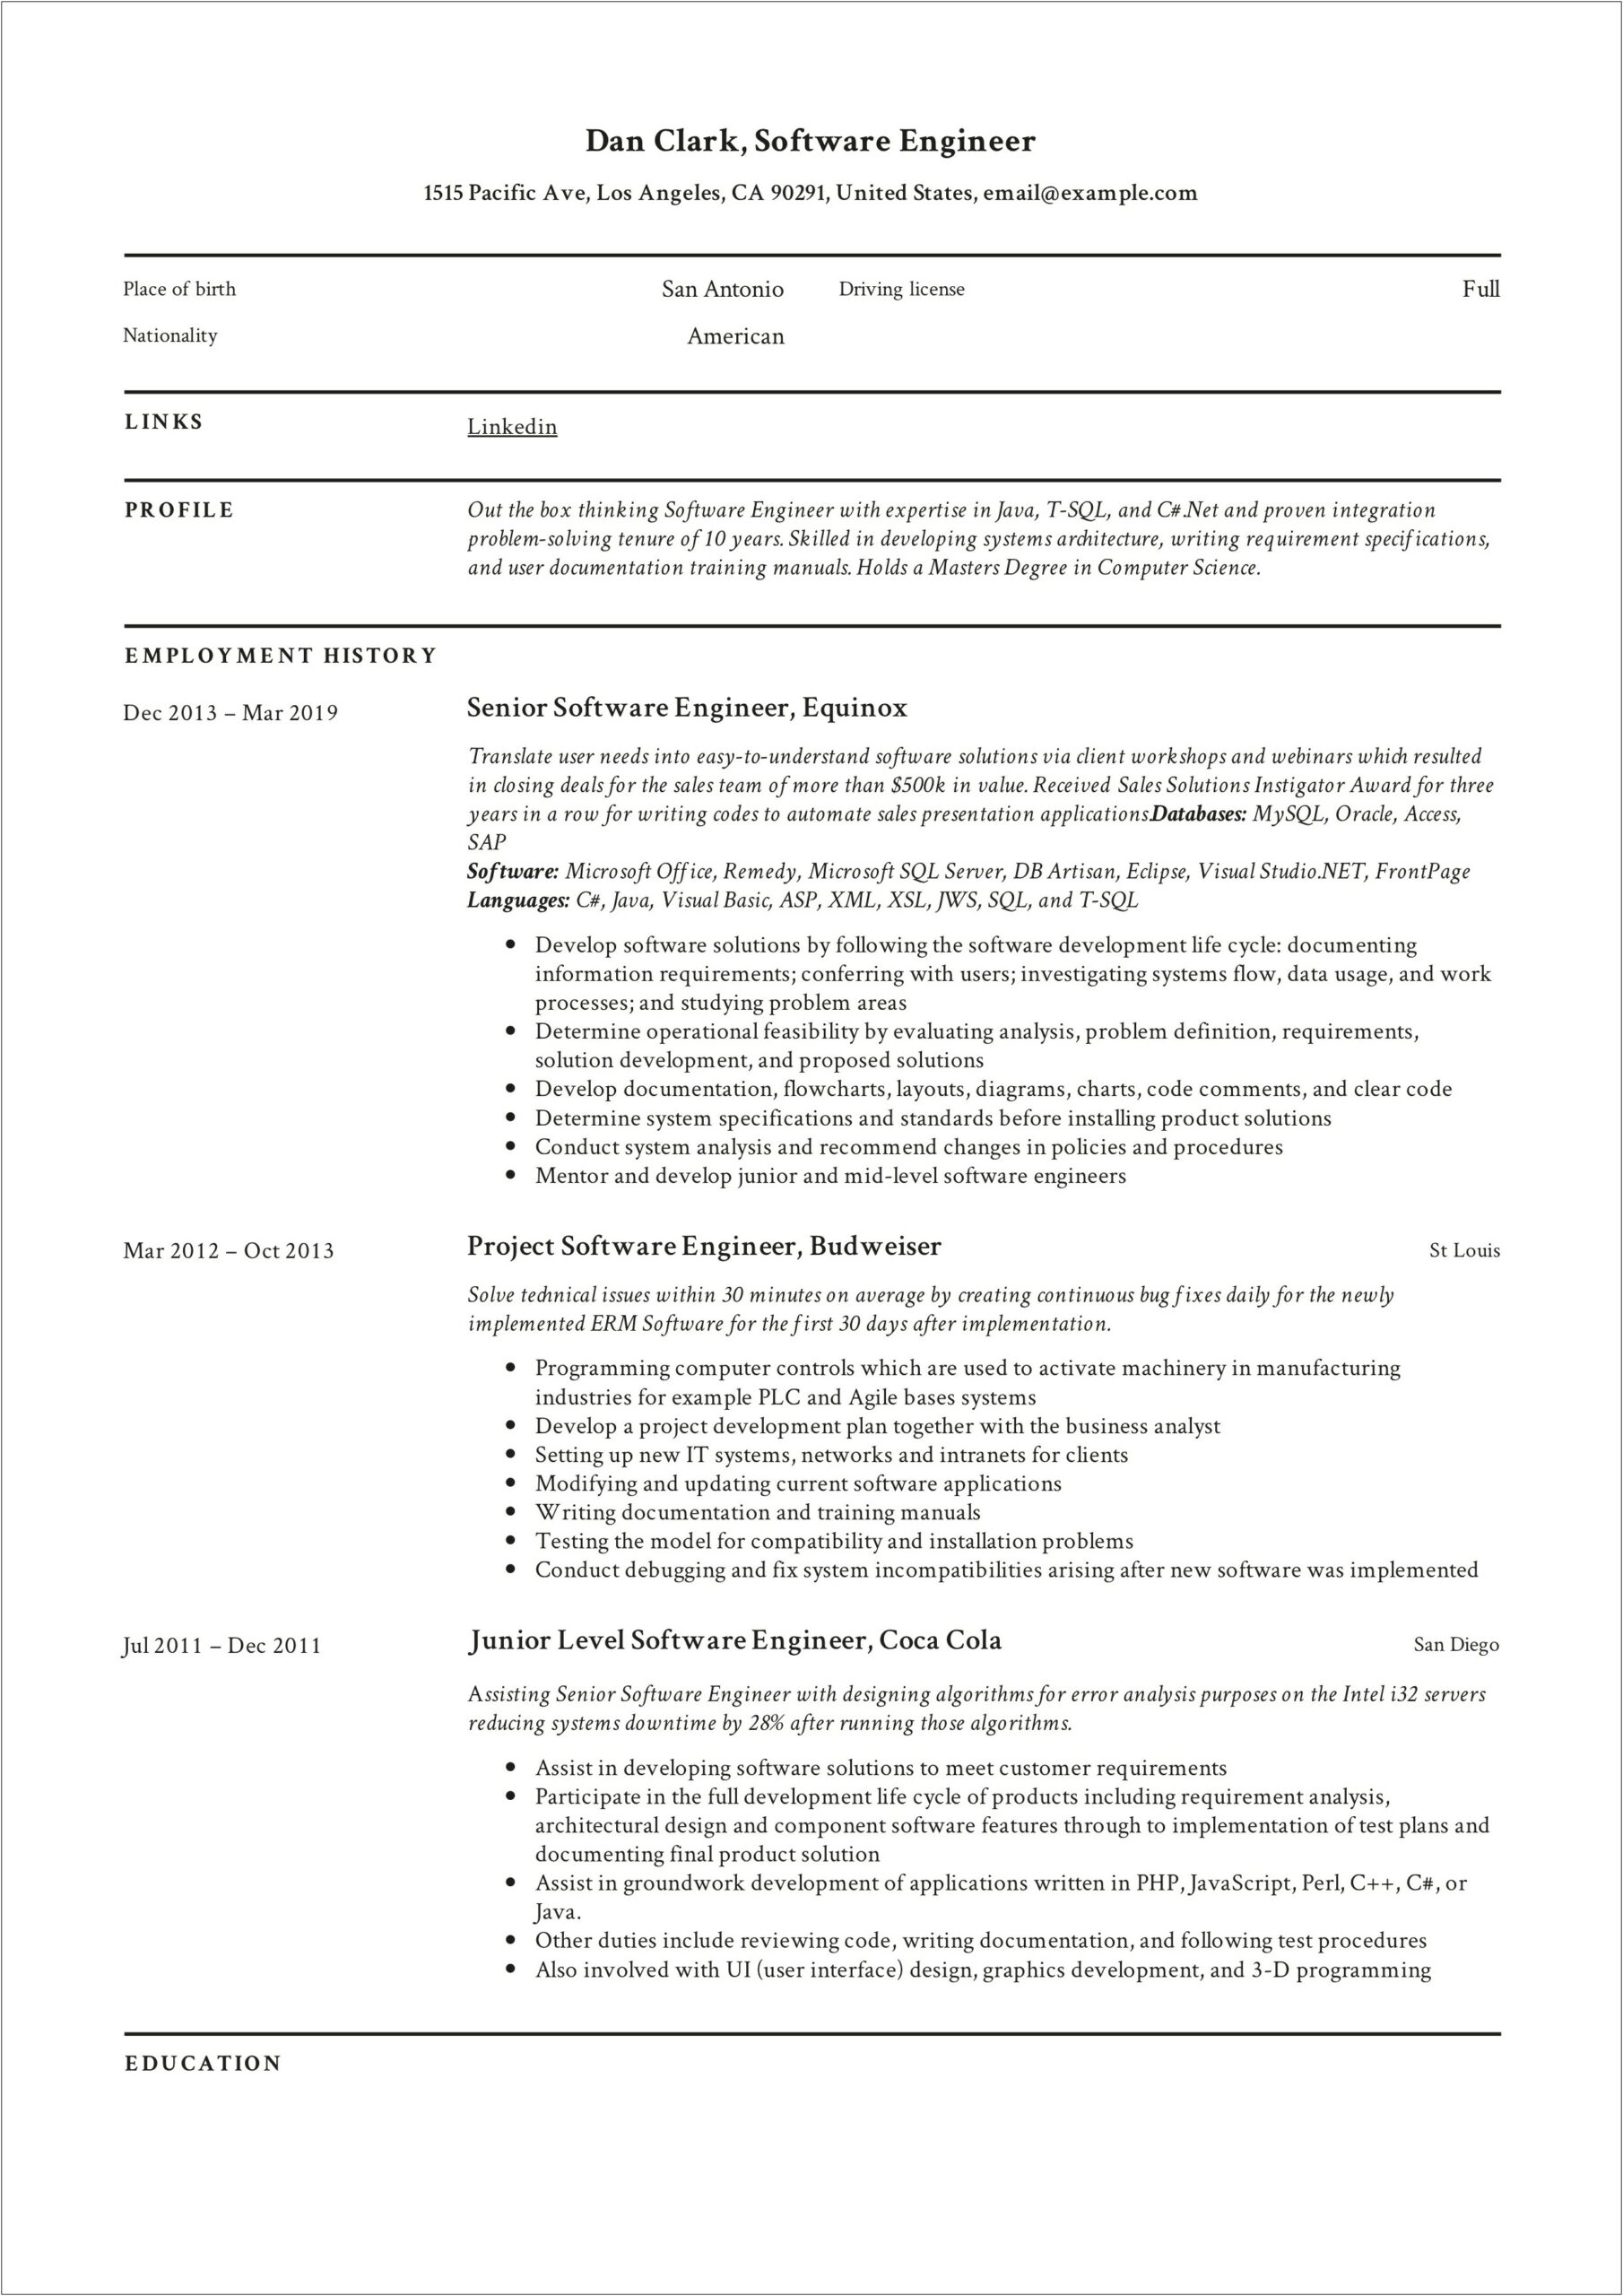 Senior Systems Engineer Resume Examples